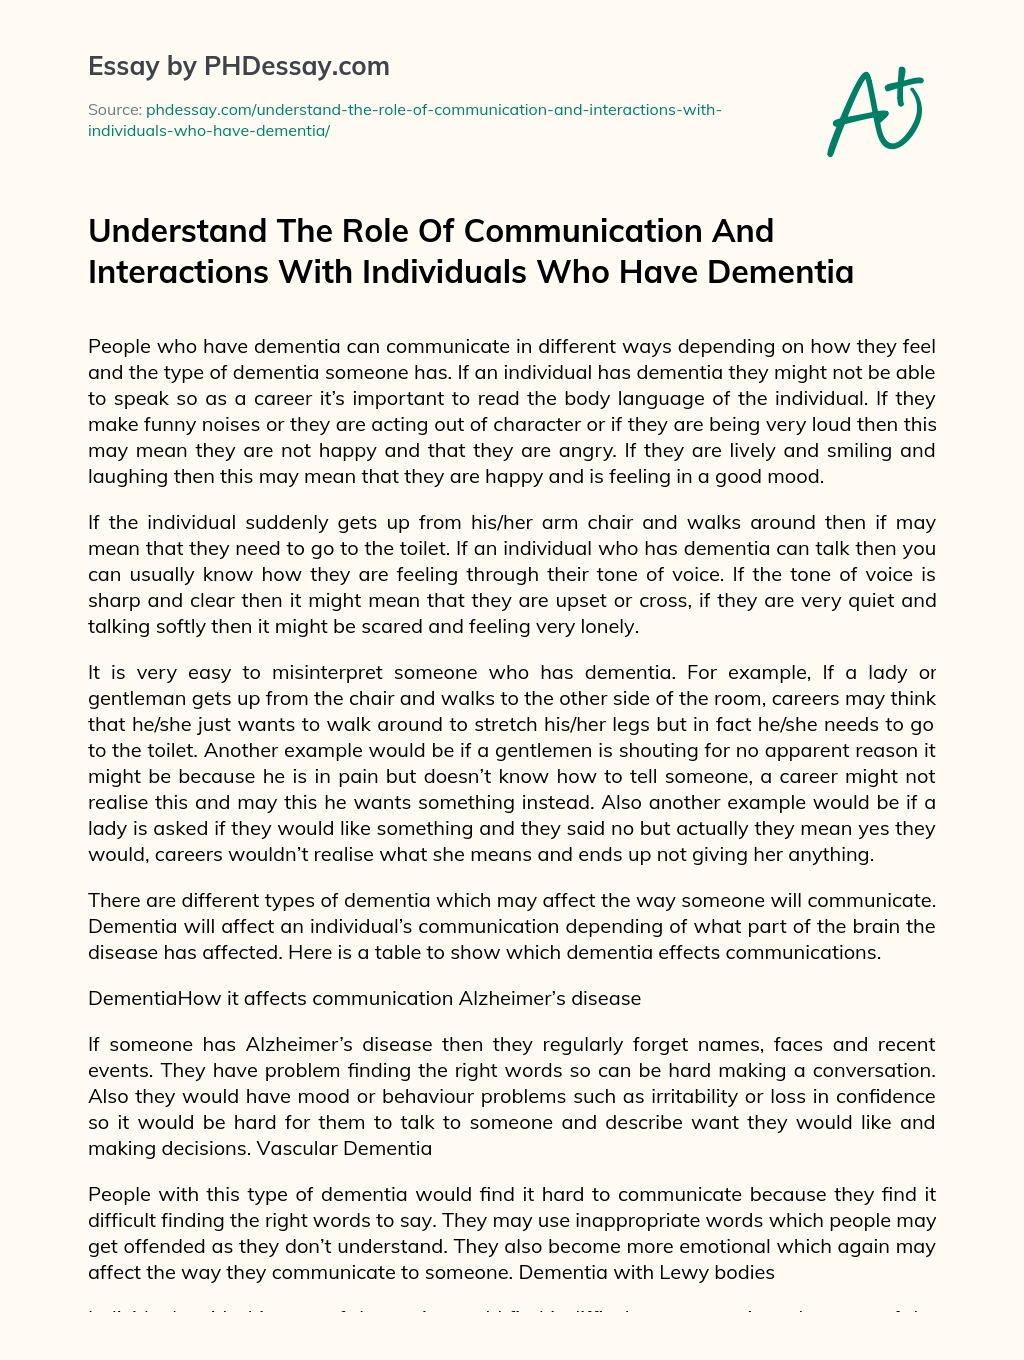 Understand The Role Of Communication And Interactions With Individuals Who Have Dementia essay